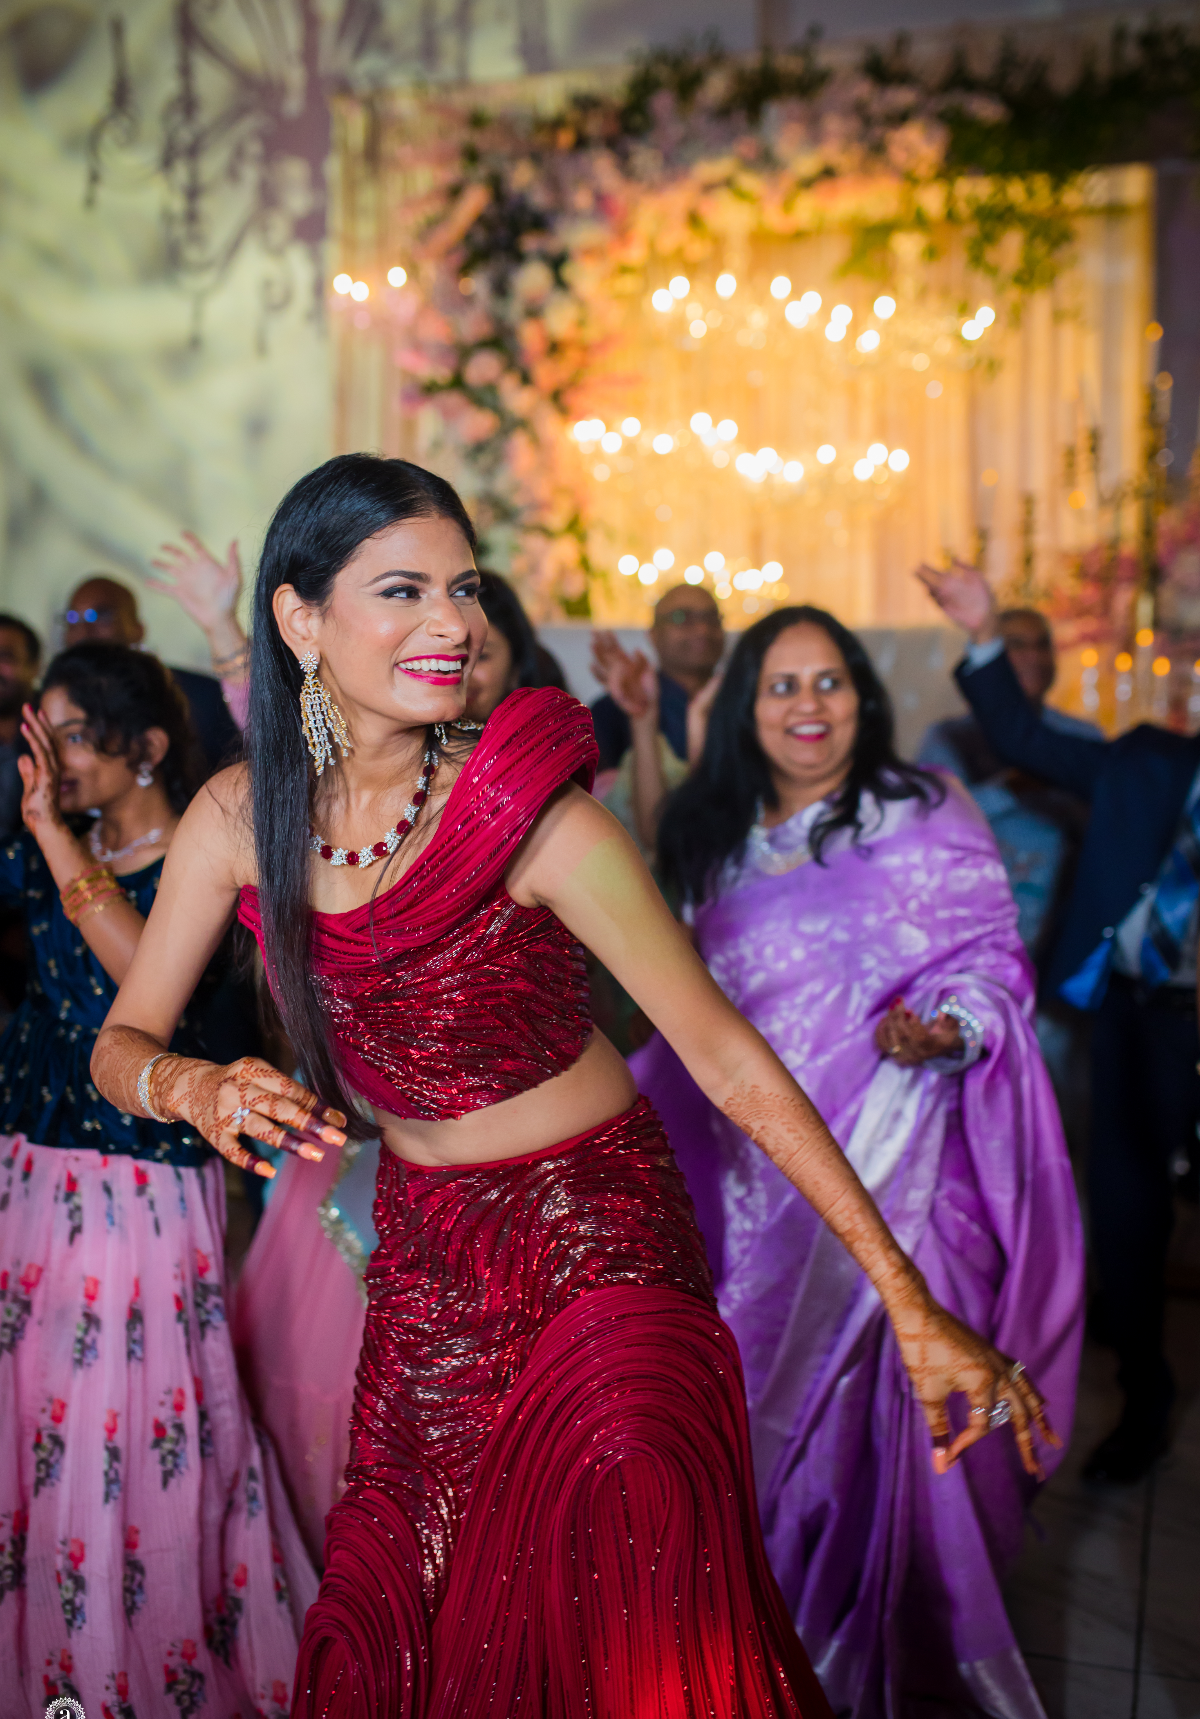 What's a big fat Indian wedding without a big fat celebratory reception to welcome the start of a new relationship together? Leave the planning and organizing to Saciva Events and just enjoy yourself! - Aneesha- preetam reception